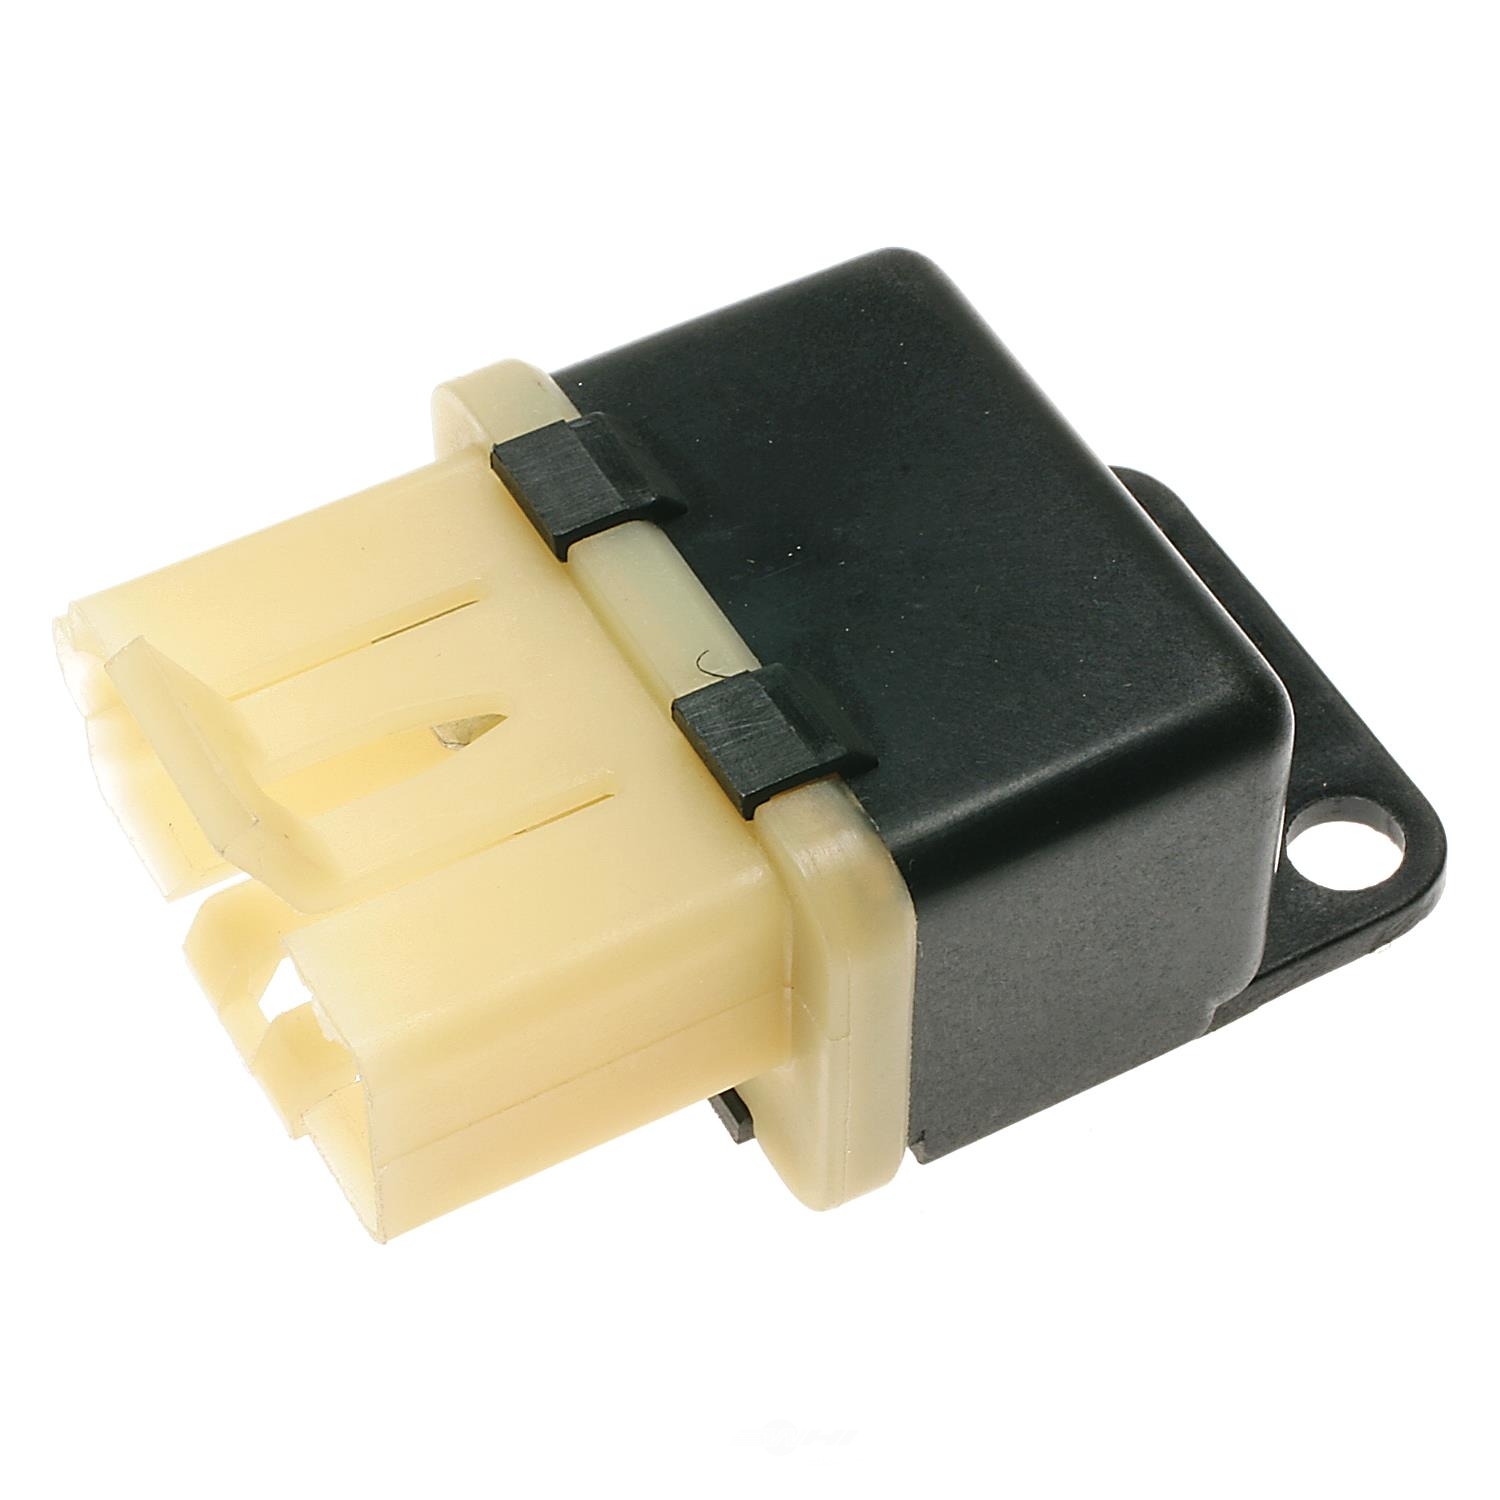 STANDARD T-SERIES - Idle Speed Control Relay - STT RY121T